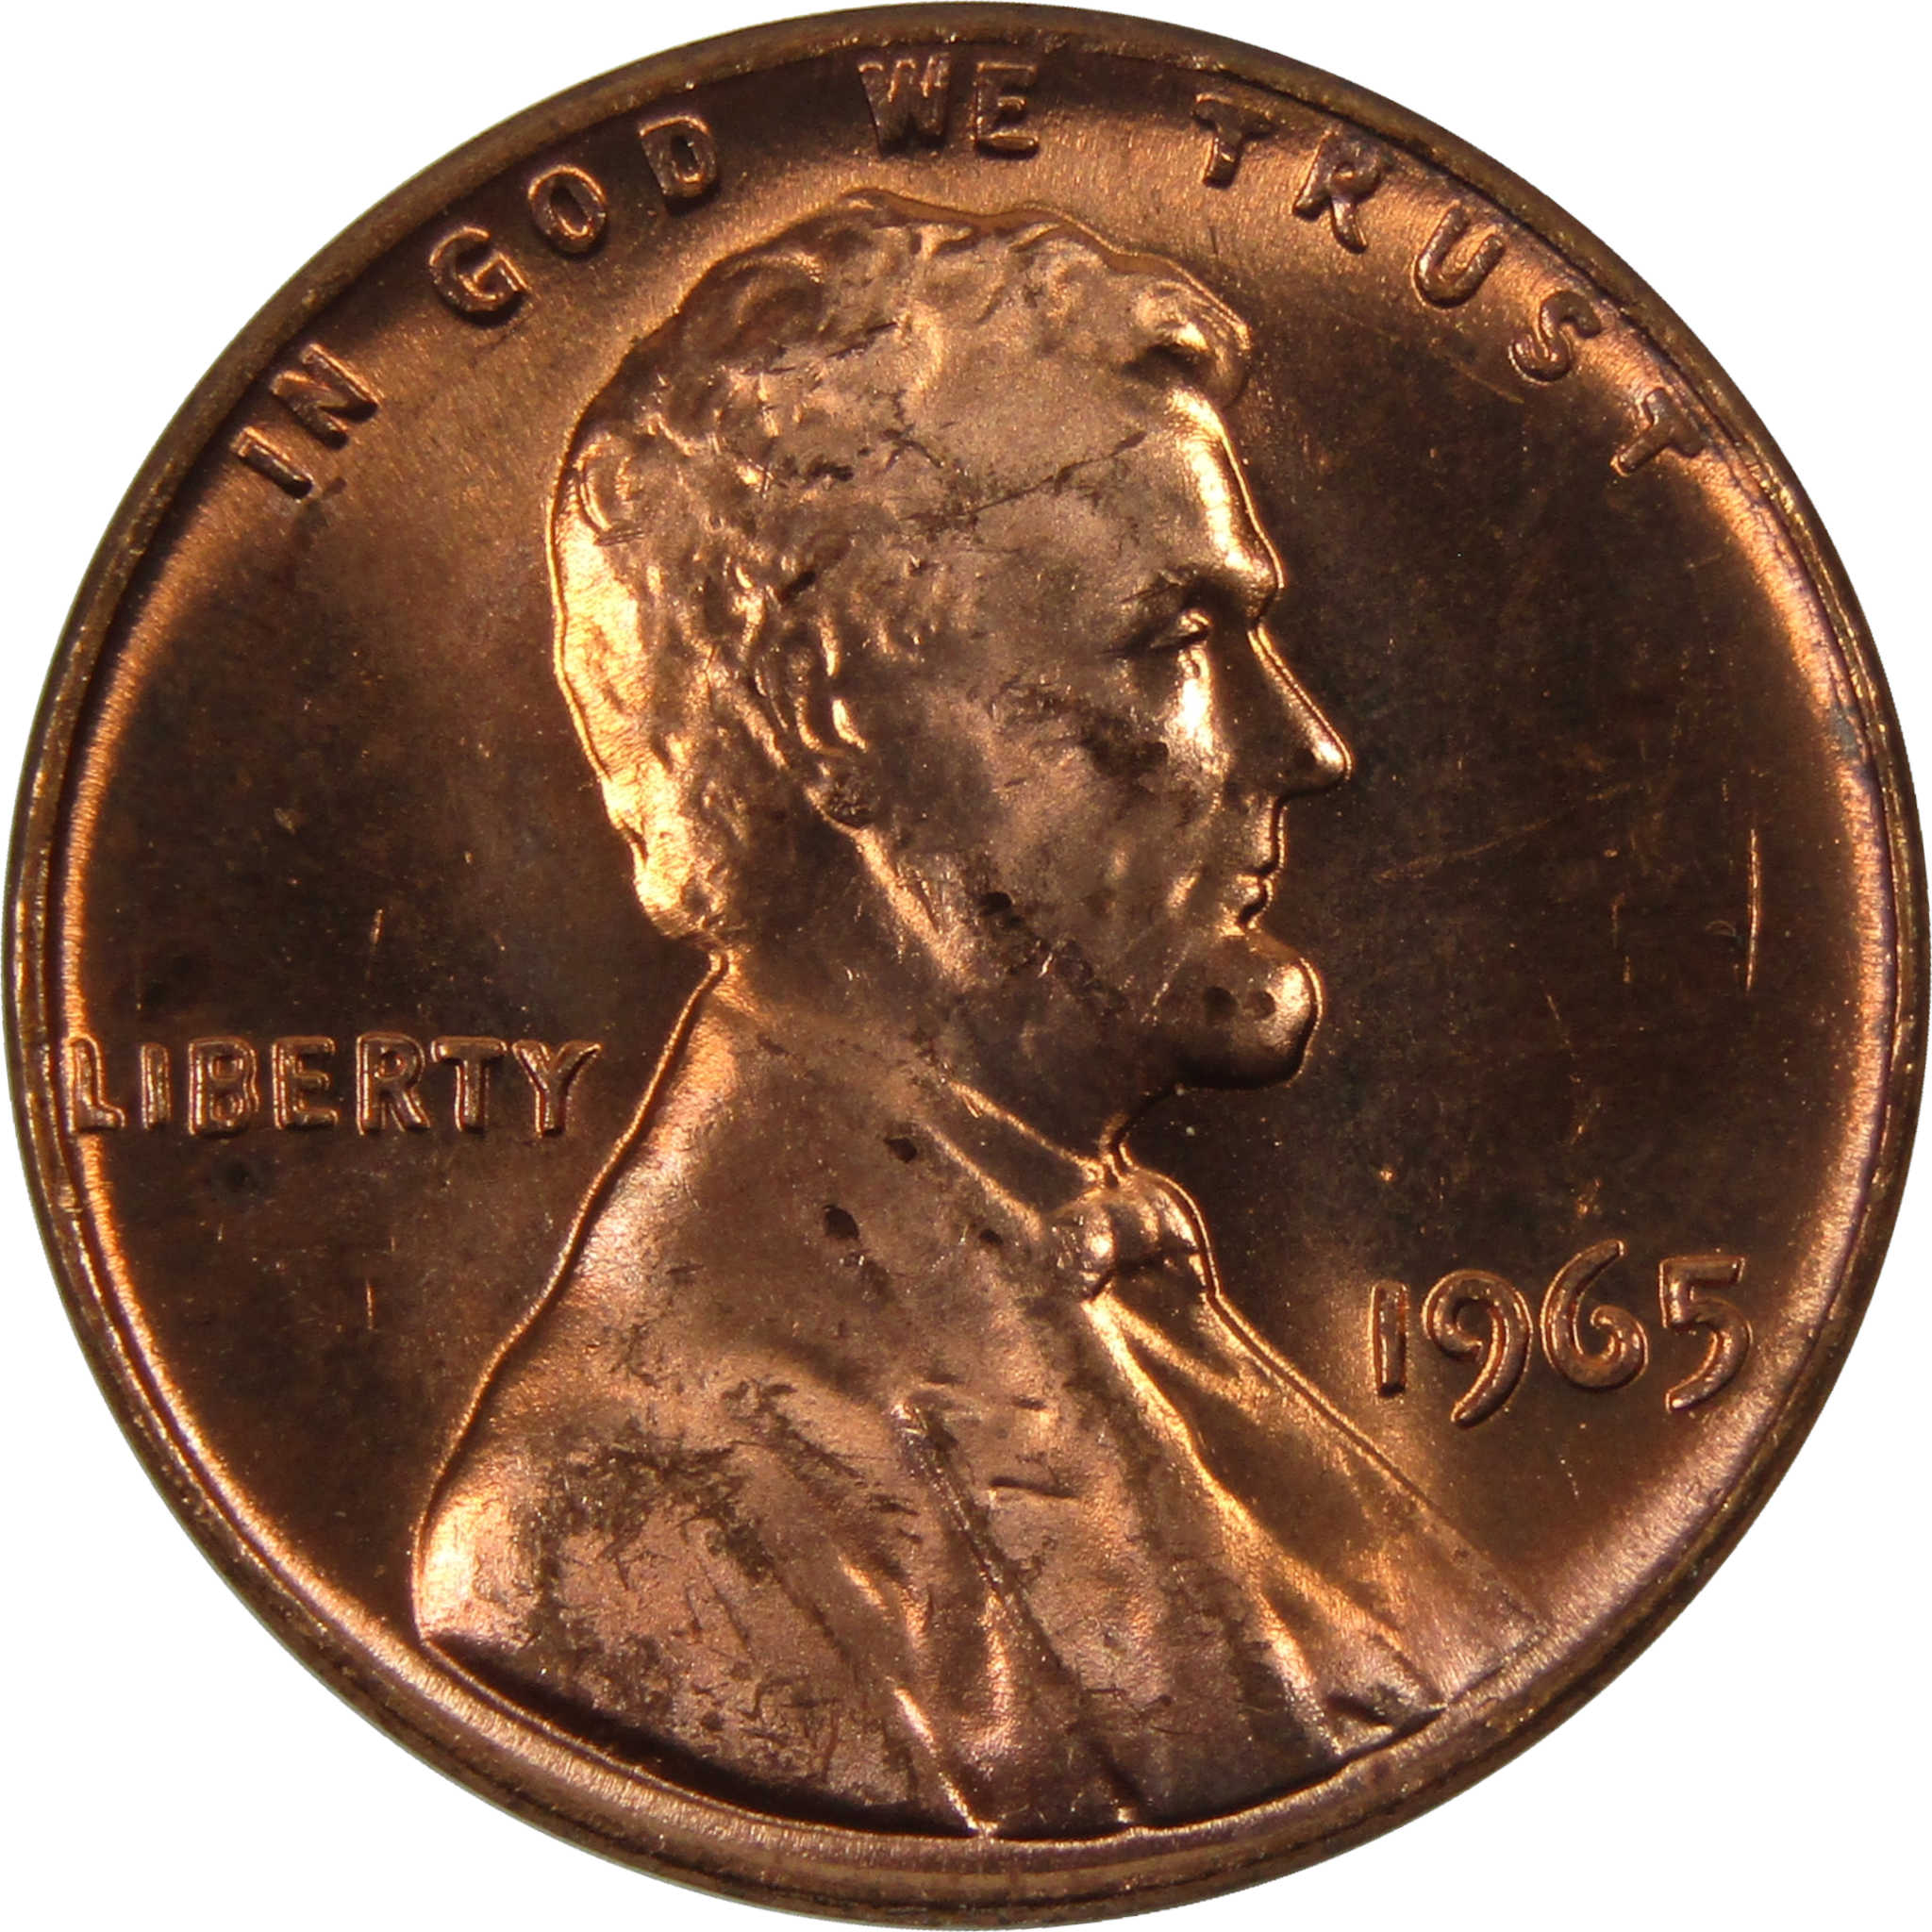 1965 Lincoln Memorial Cent BU Uncirculated Penny 1c Coin